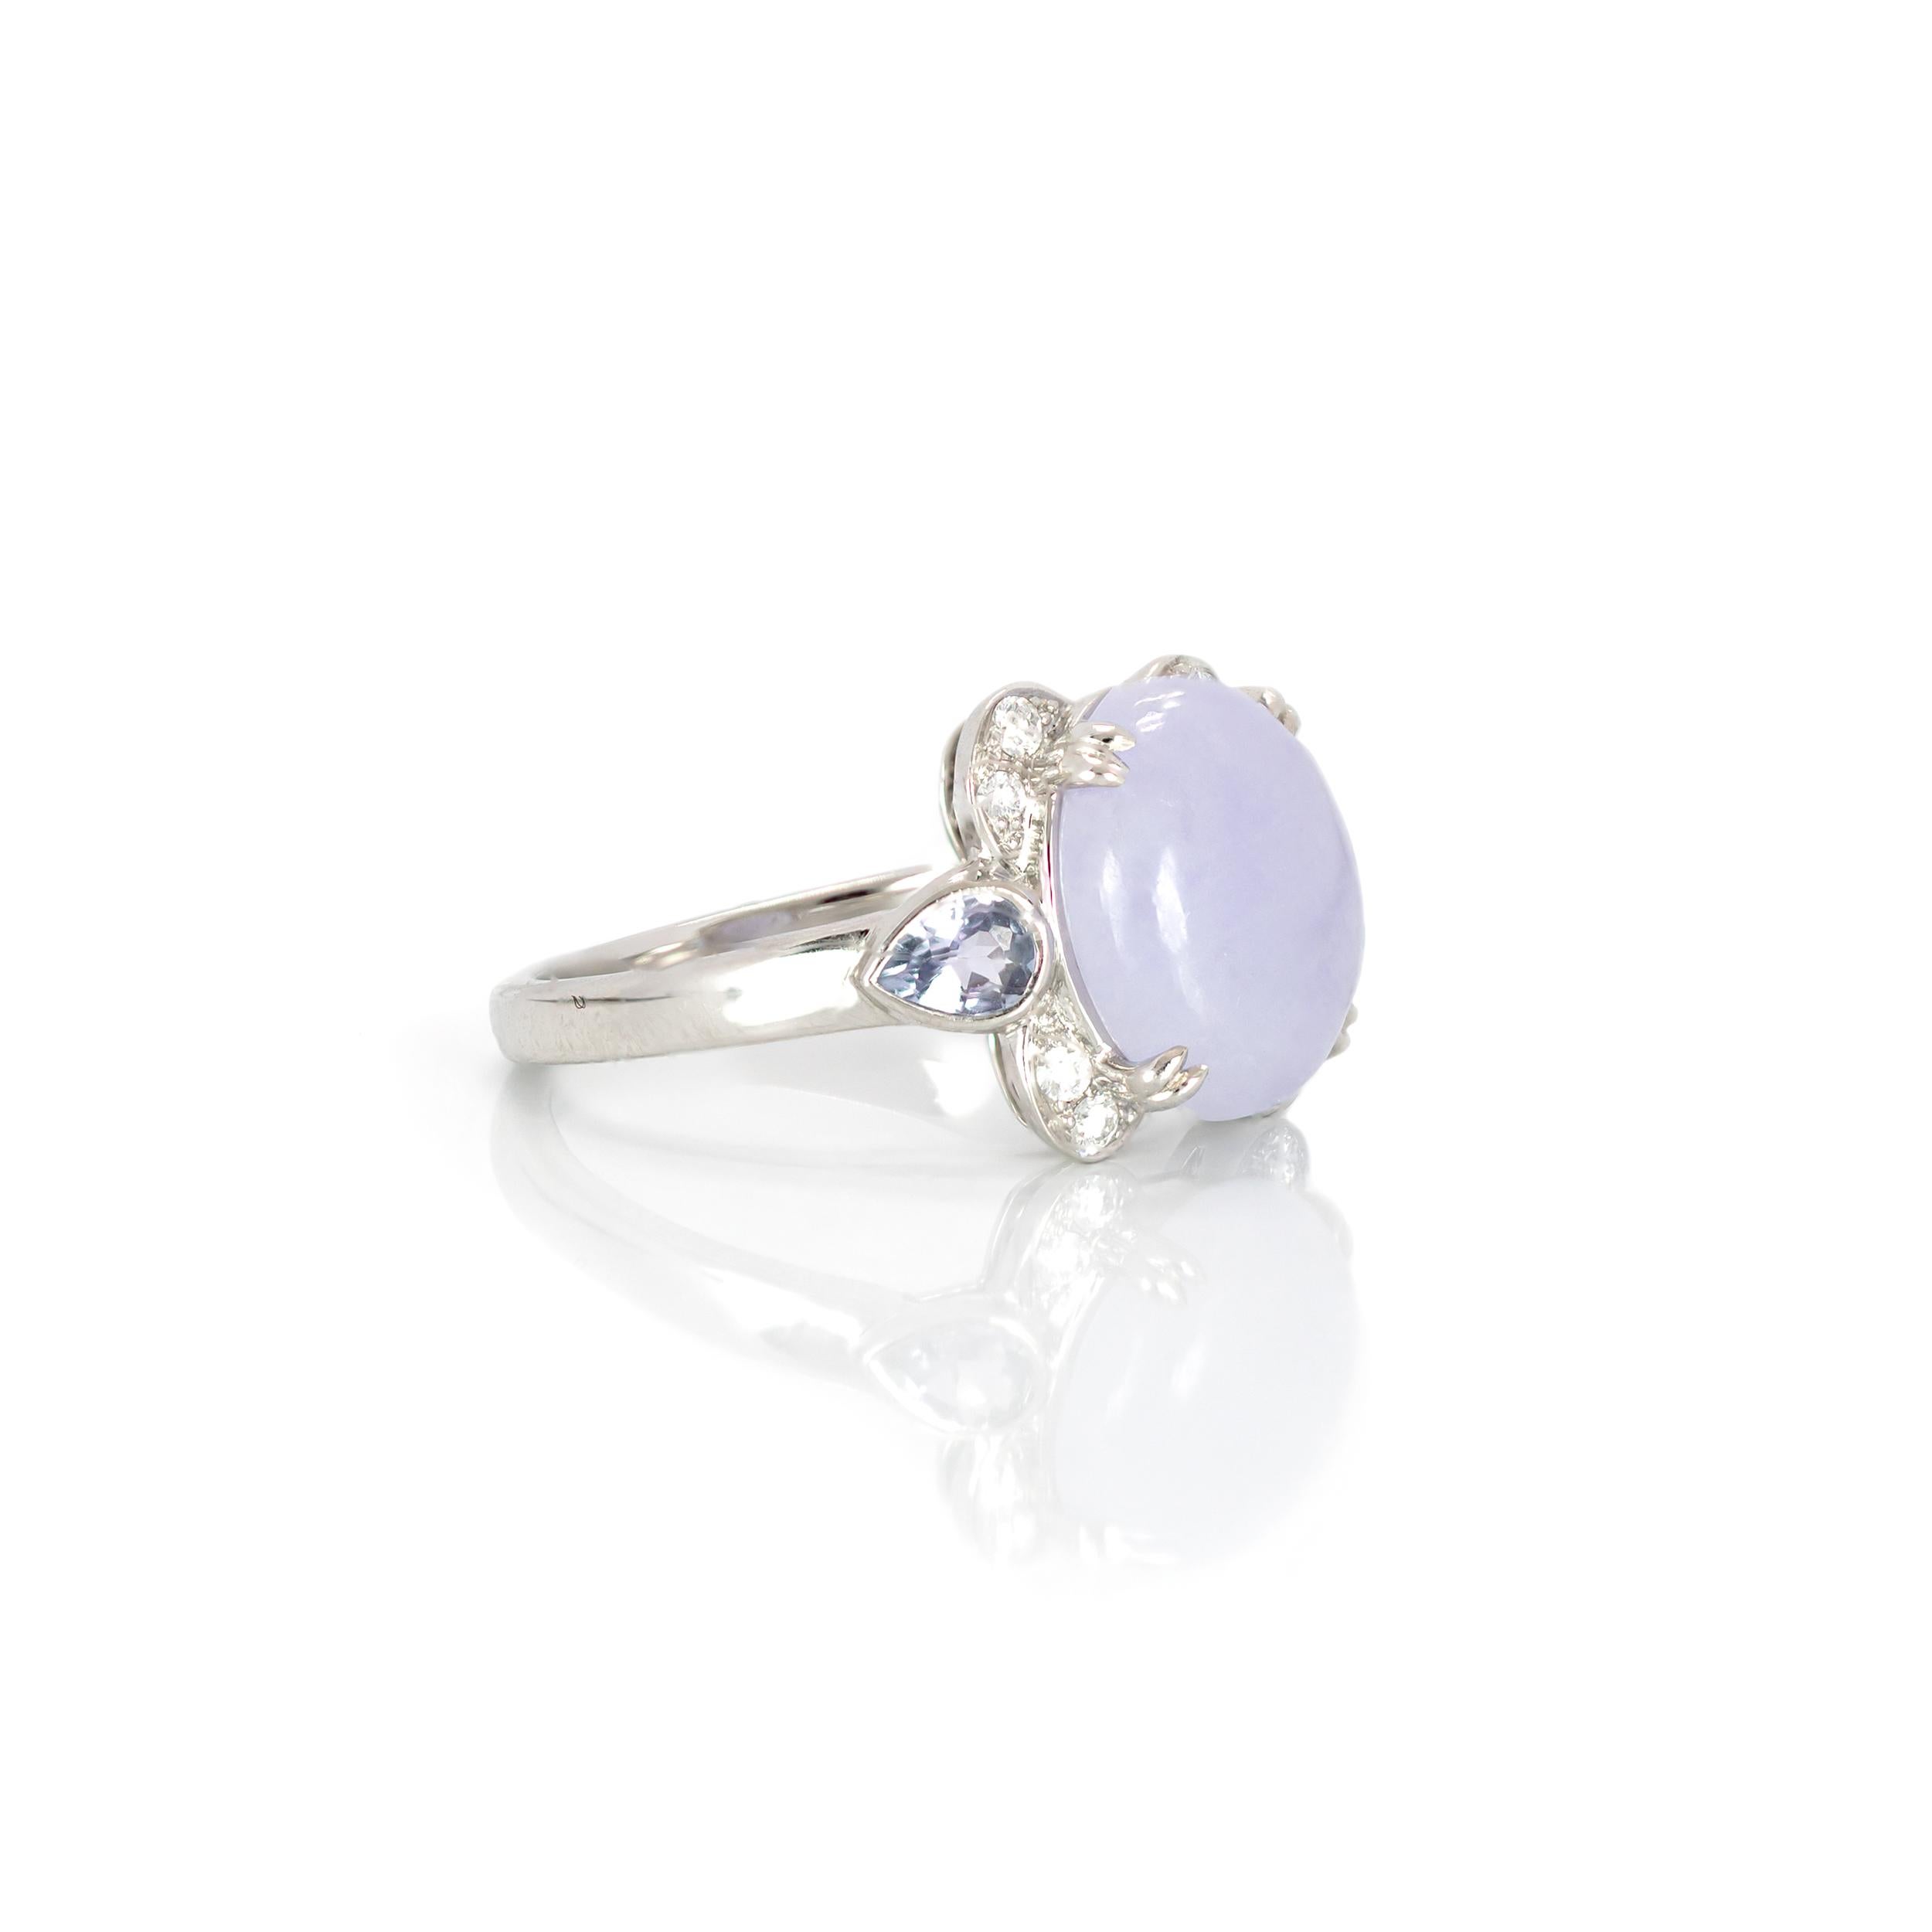 Lavender Jadeite honors Bona Dea, the Classical Greek Goddess of Women. Her temple, Aventine, was cared for only by women. She was believed to protect women through all of their changes in life. It is no wonder Lavender Jadeite was chosen for Bona